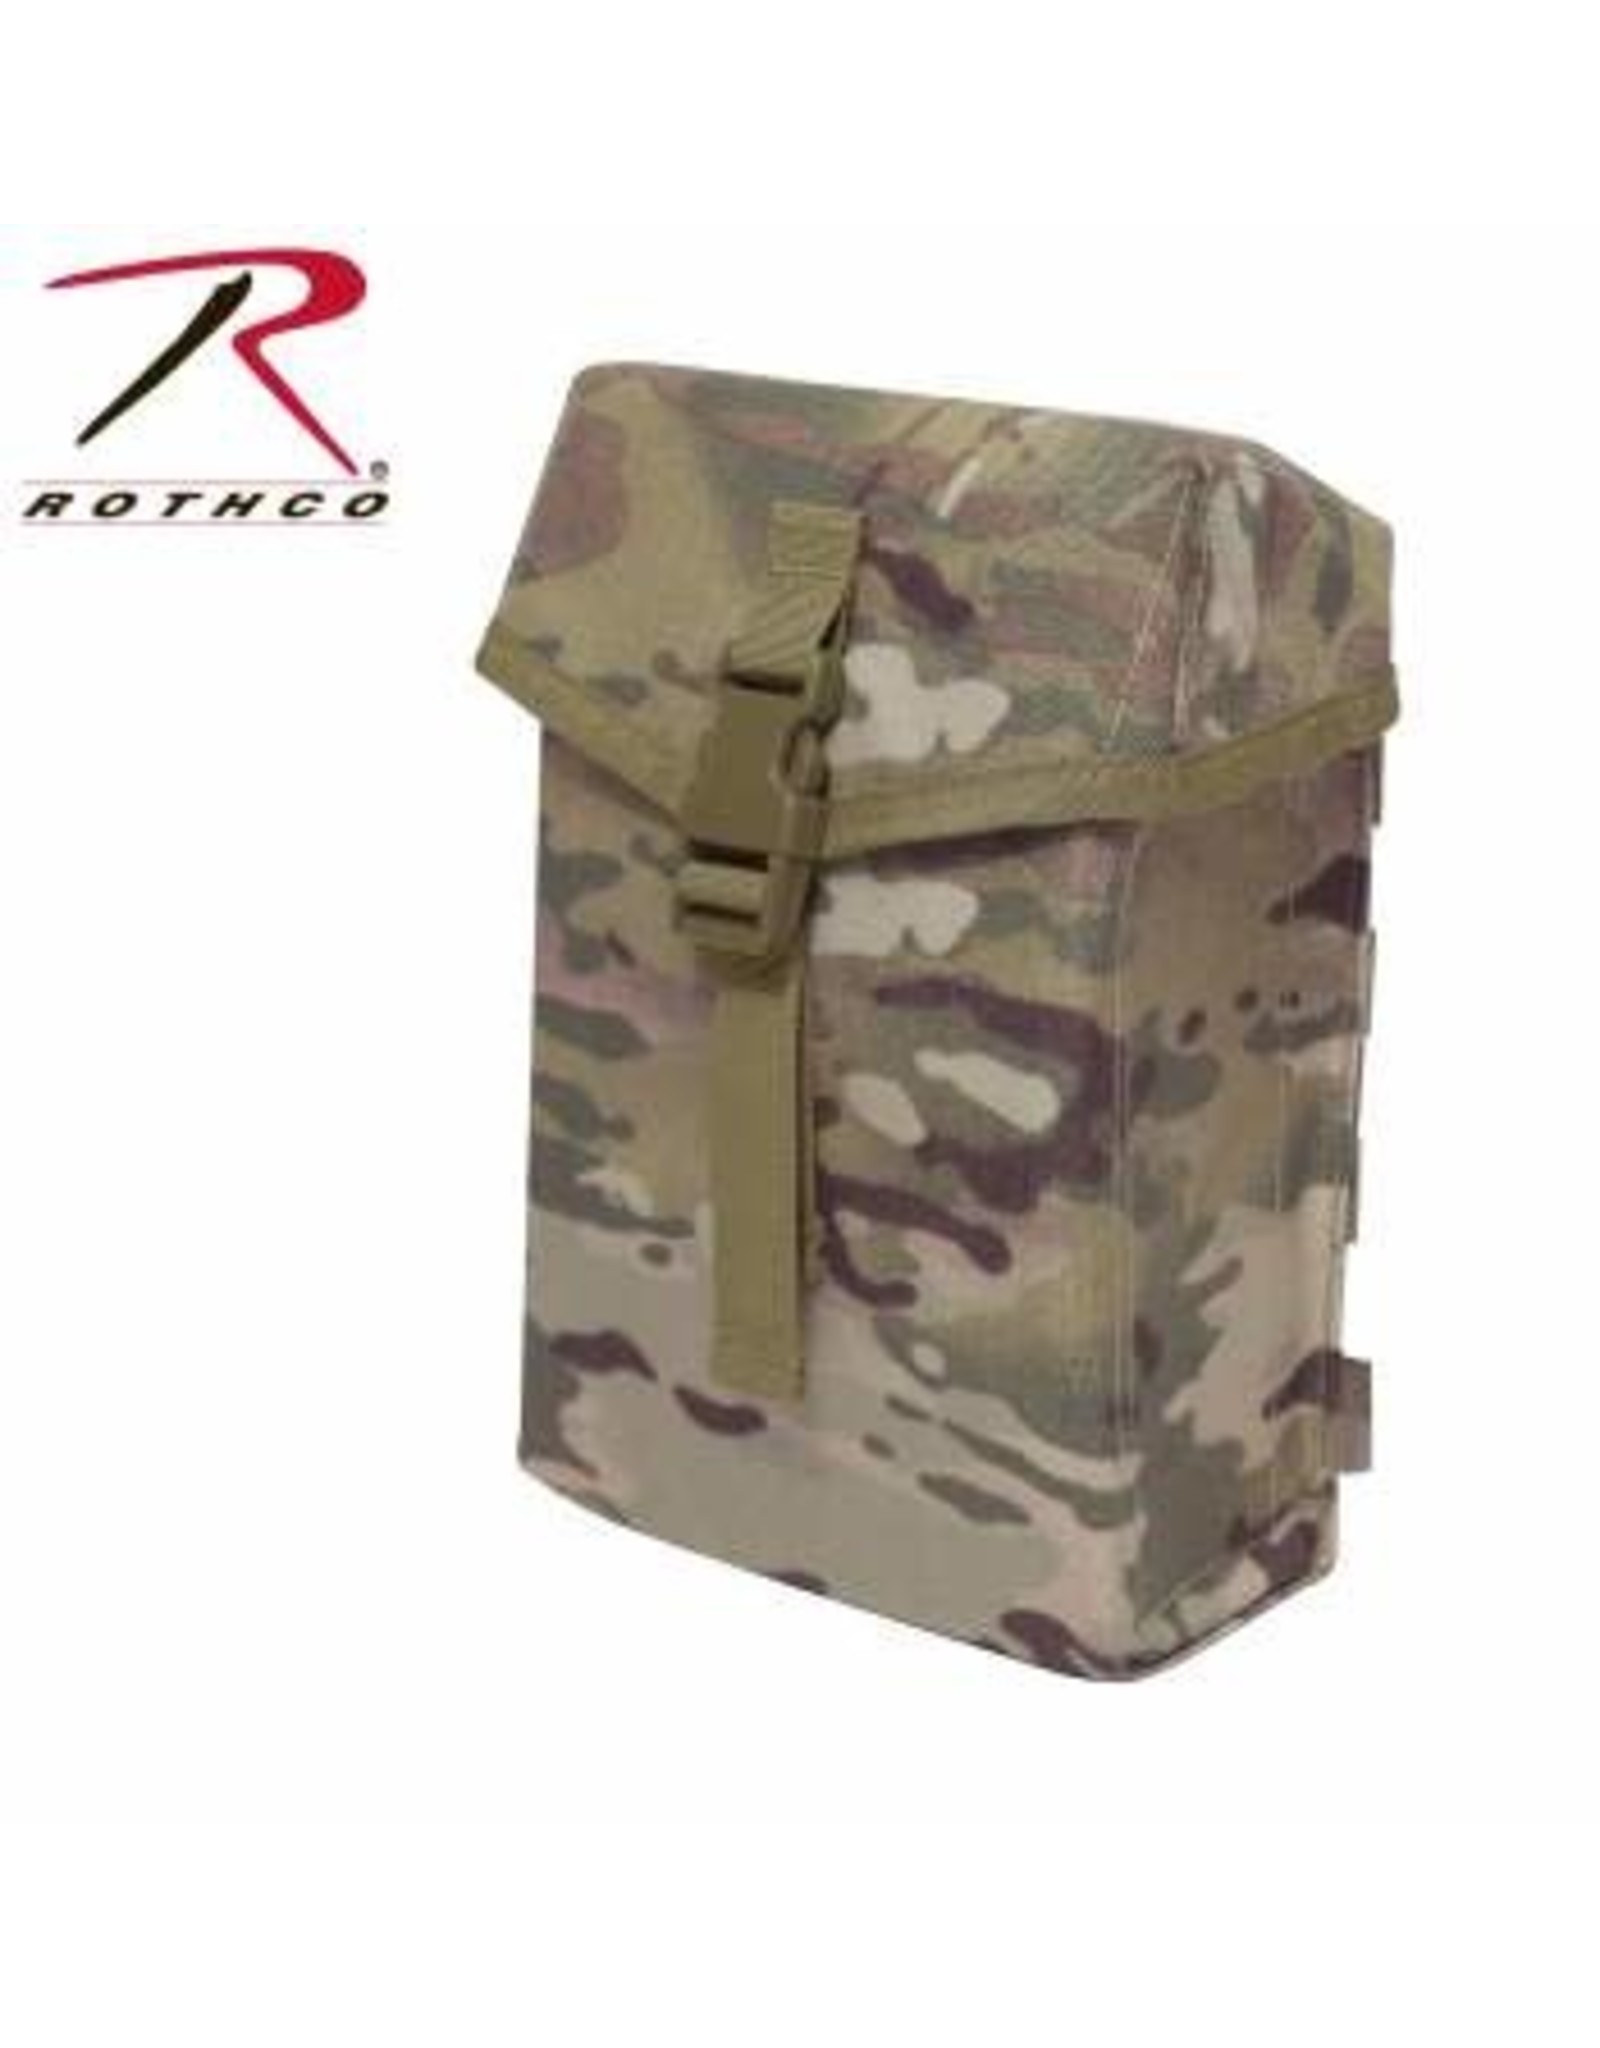 Rothco Saw Ammo Pouch 200 Round Multicam NOT GI